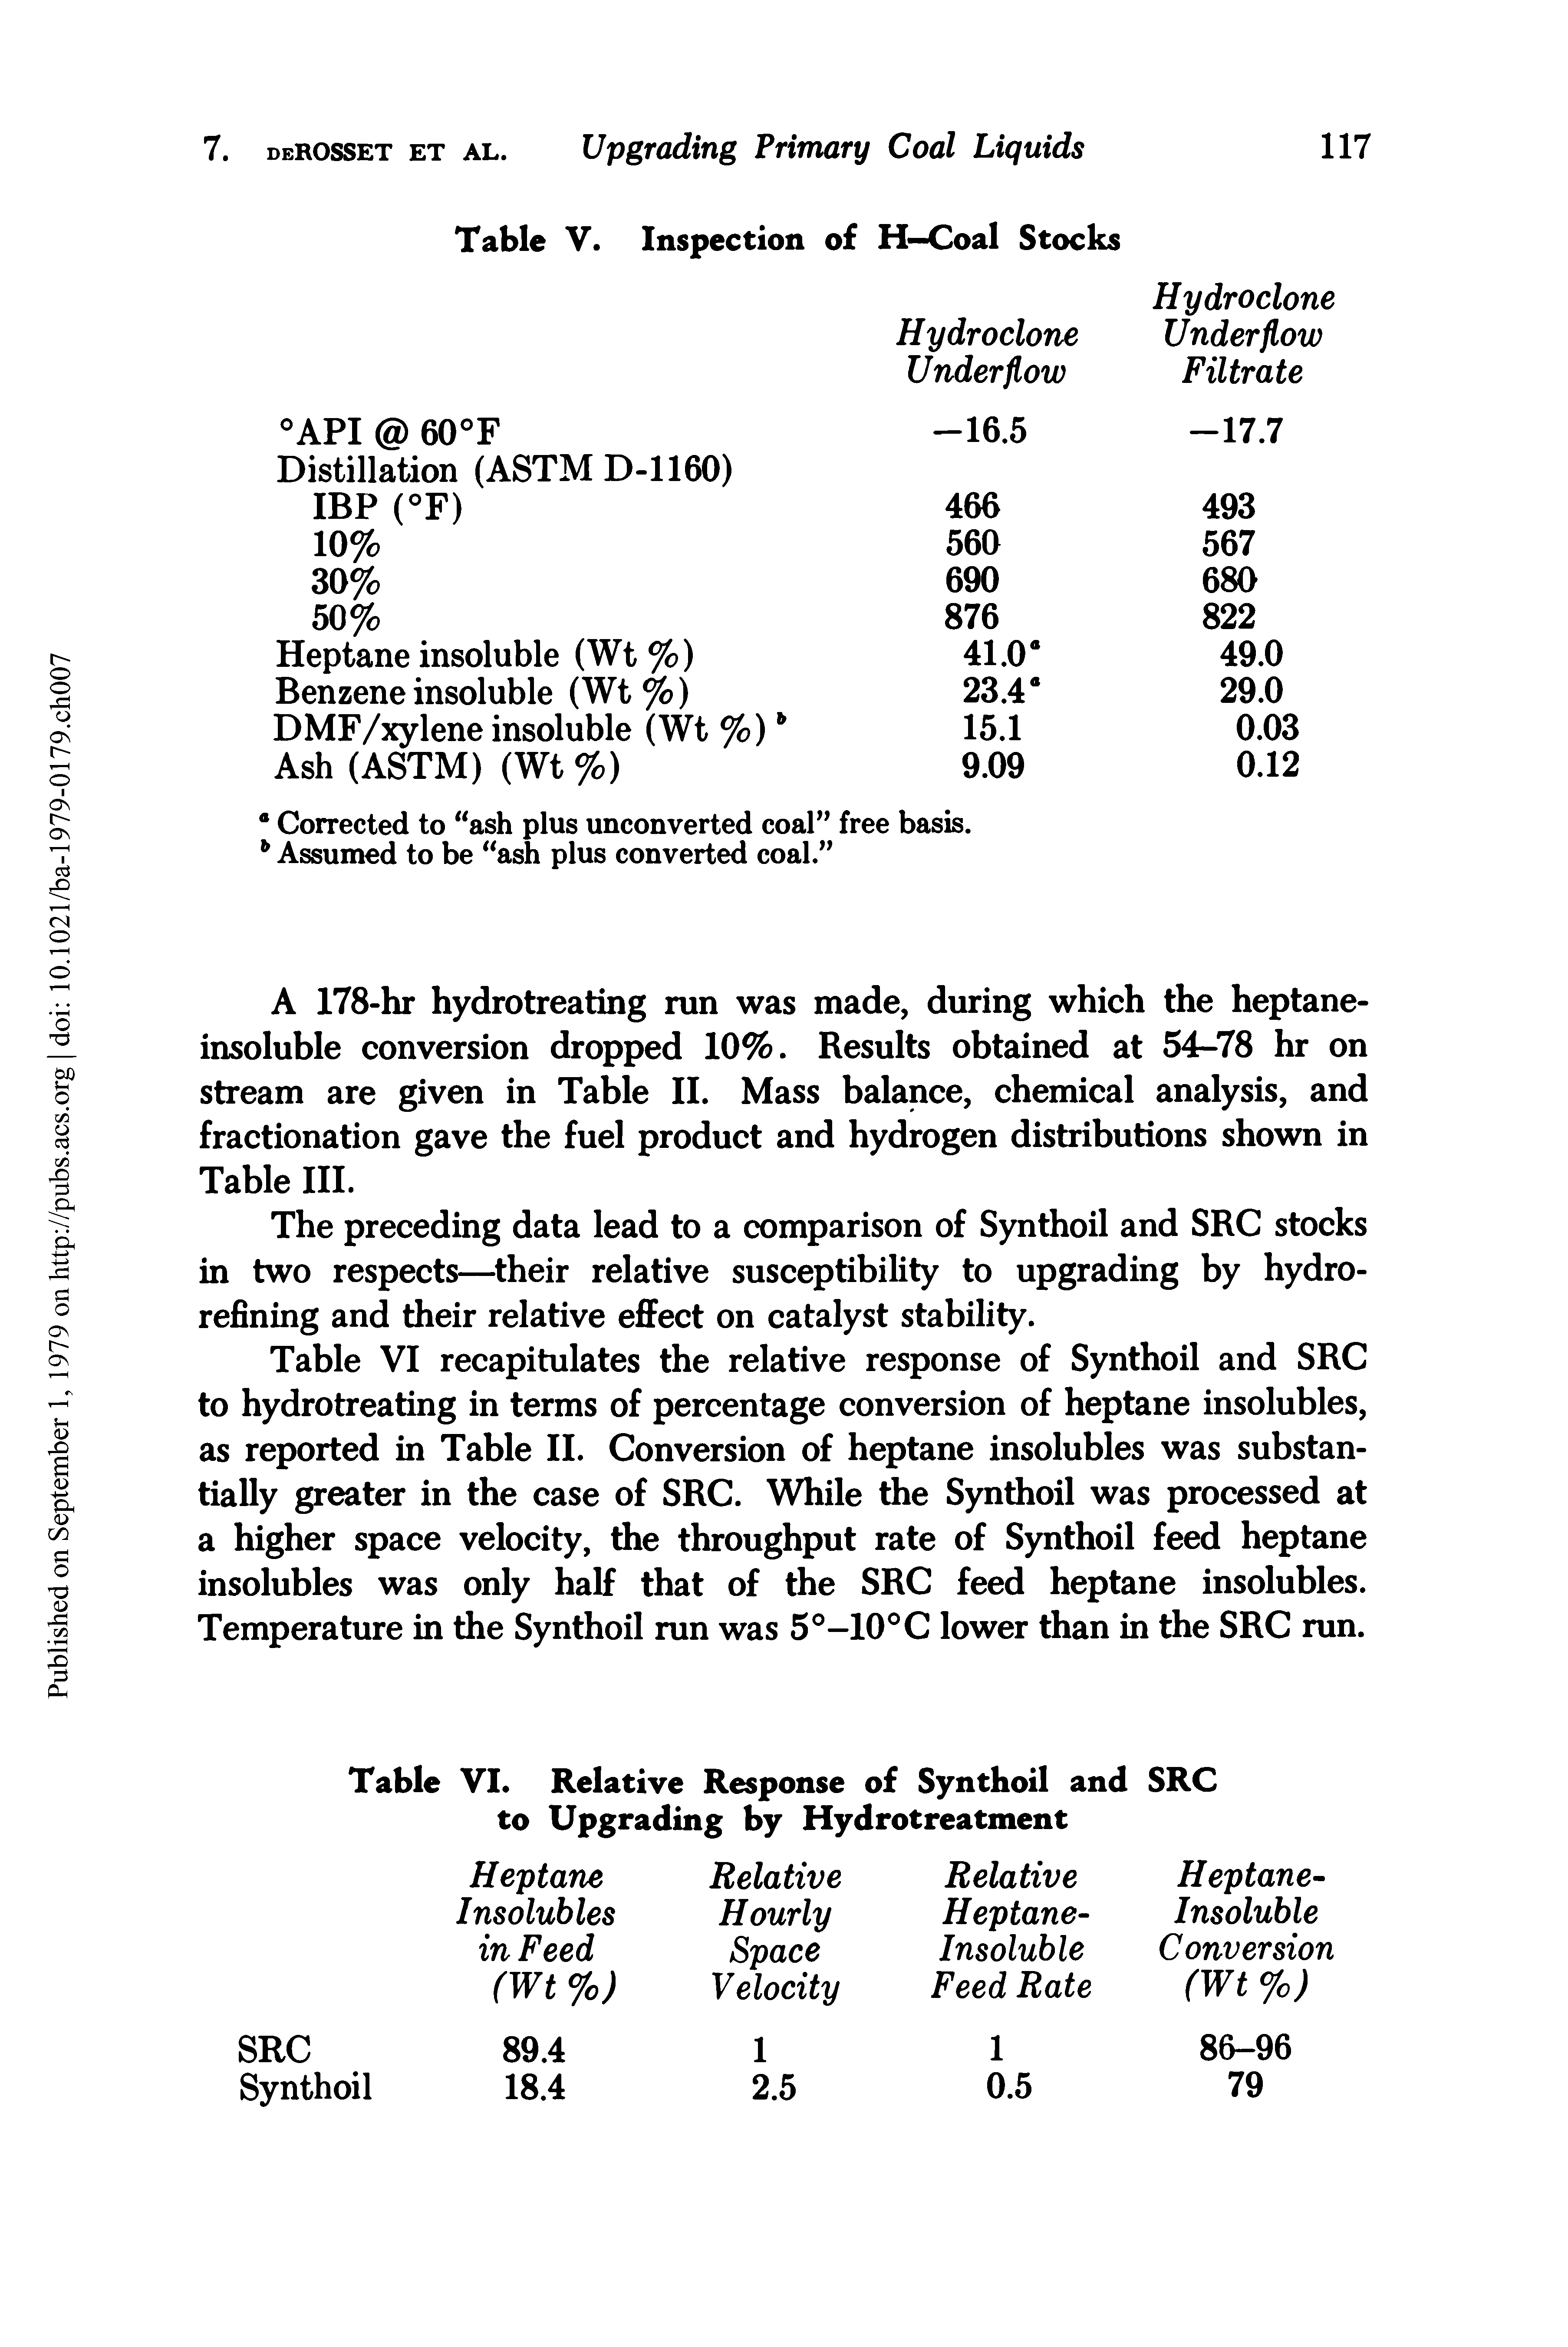 Table VI recapitulates the relative response of Synthoil and SRC to hydrotreating in terms of percentage conversion of heptane insolubles, as reported in Table II. Conversion of heptane insolubles was substantially greater in the case of SRC. While the Synthoil was processed at a higher space velocity, the throughput rate of Synthoil feed heptane insolubles was only half that of the SRC feed heptane insolubles. Temperature in the Synthoil run was 5°-10°C lower than in the SRC run.